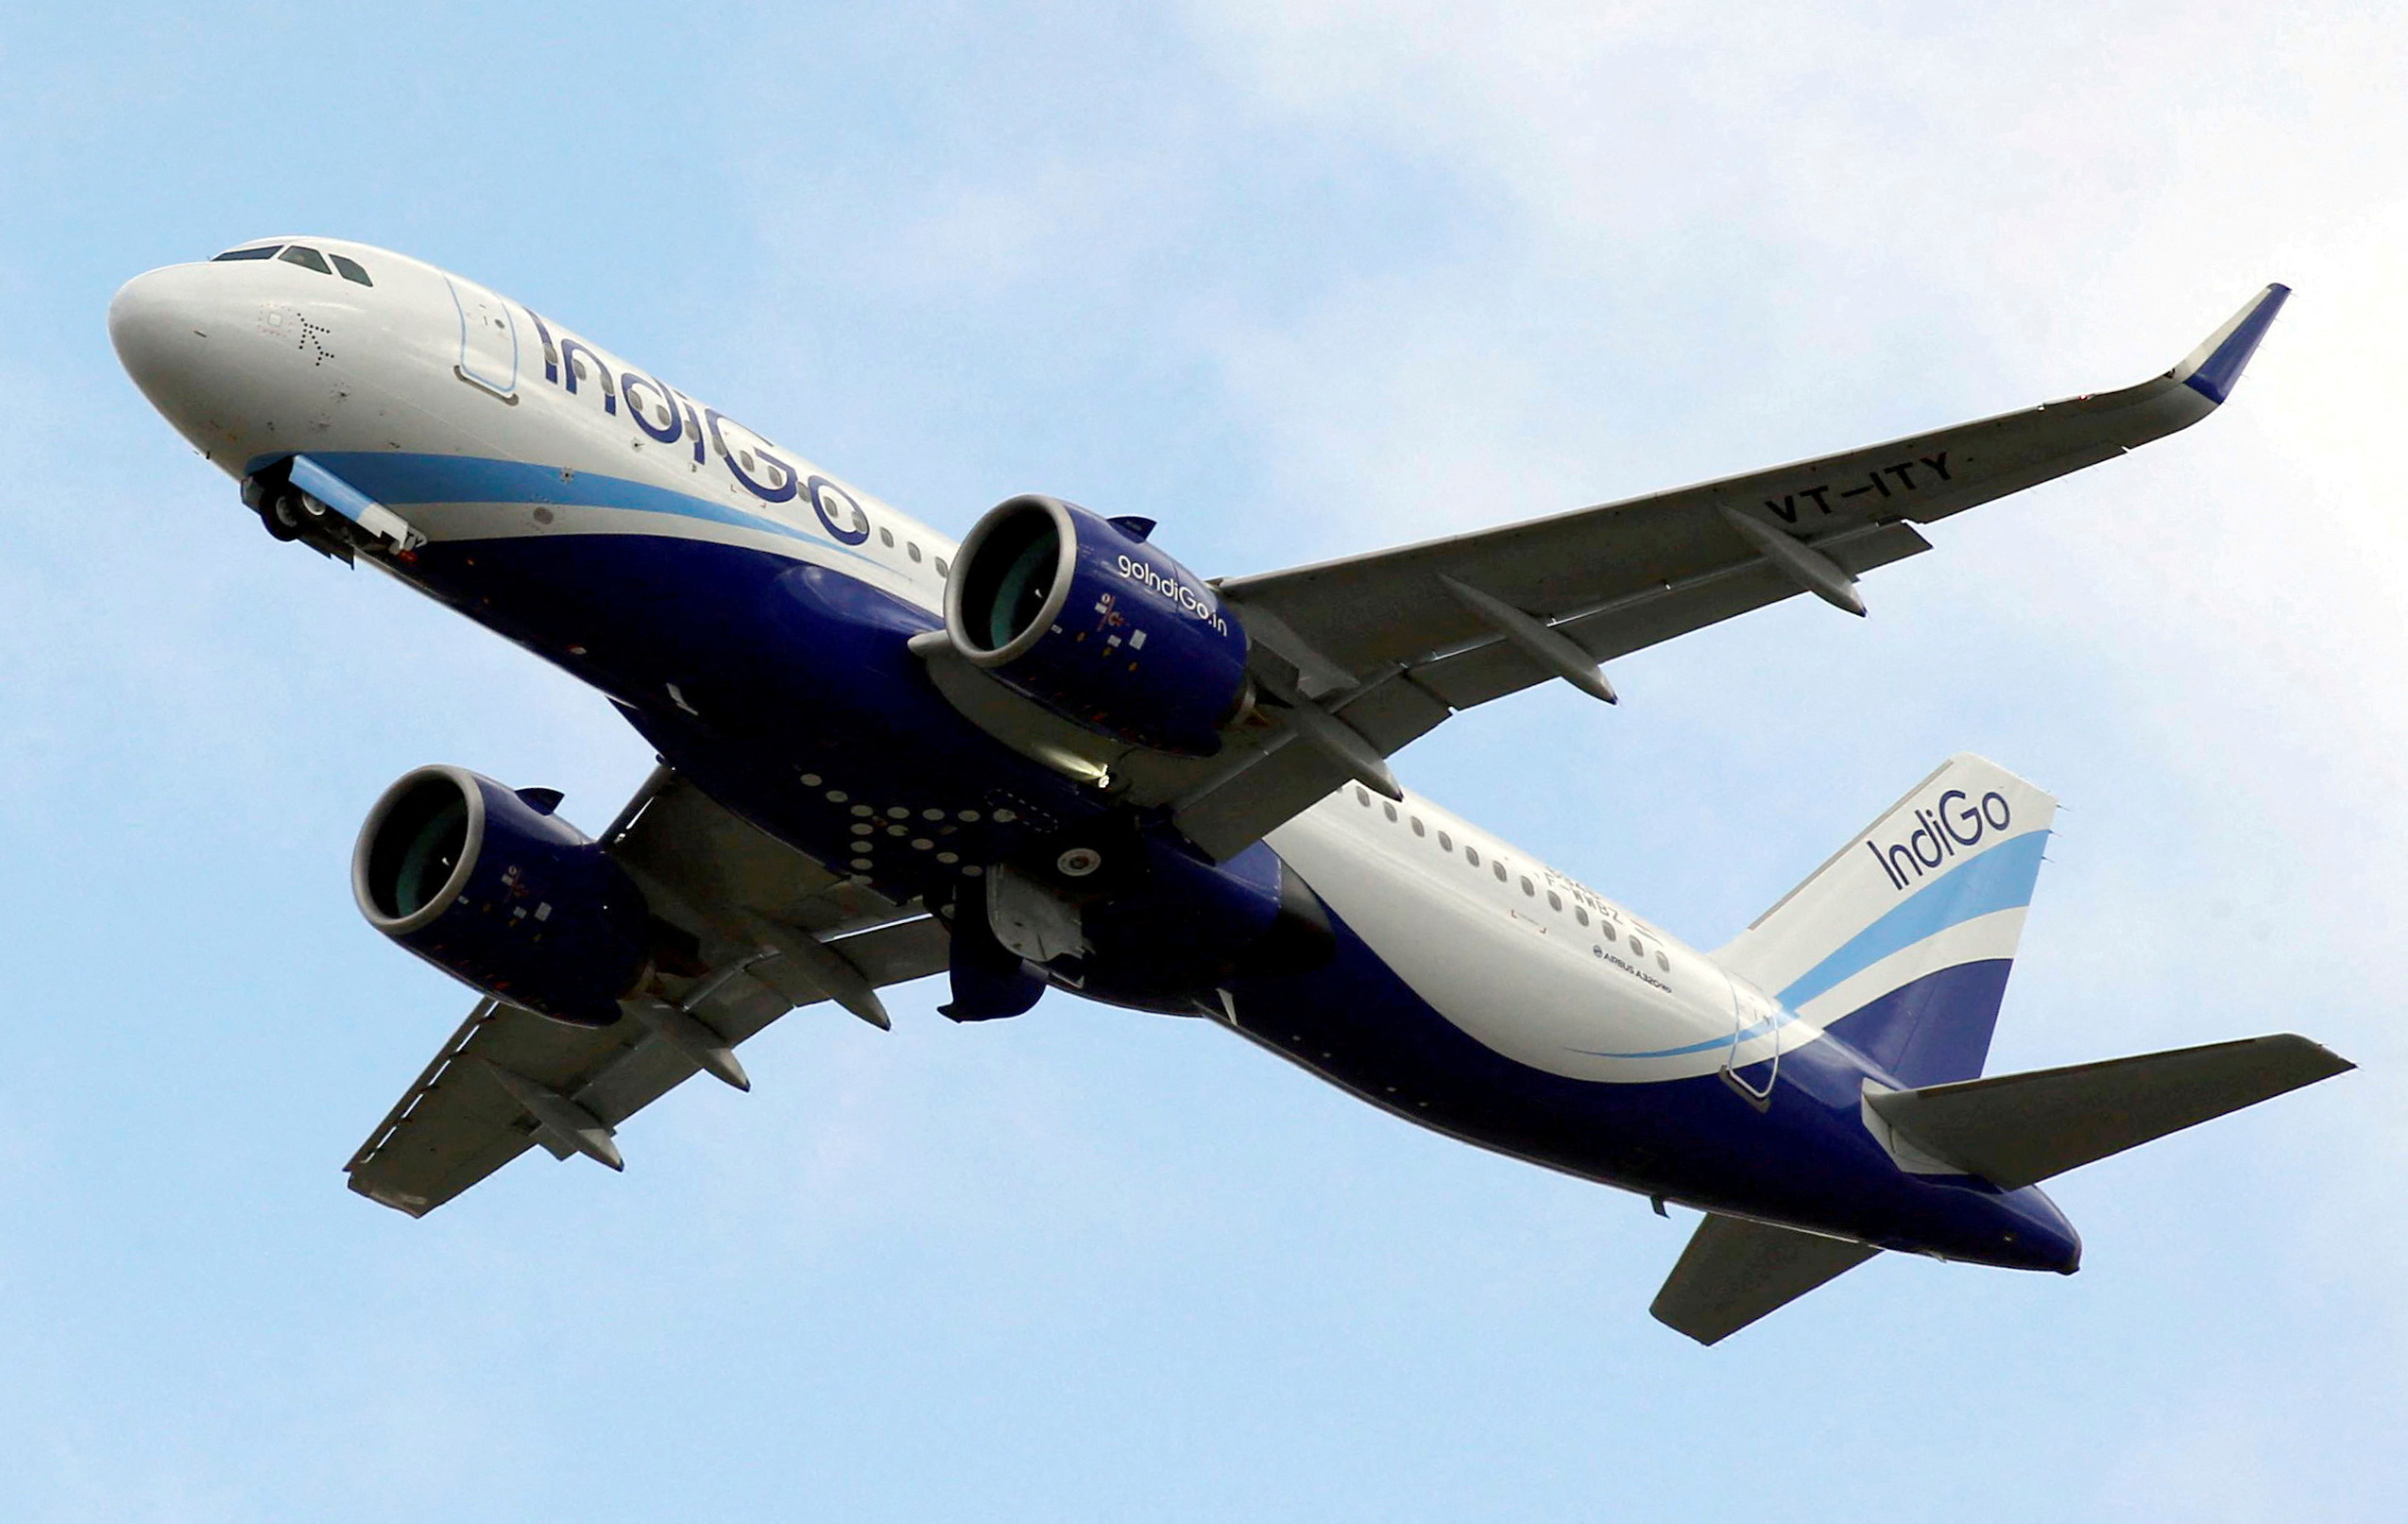 An IndiGo Airlines Airbus A320 aircraft takes off in Colomiers near Toulouse, France